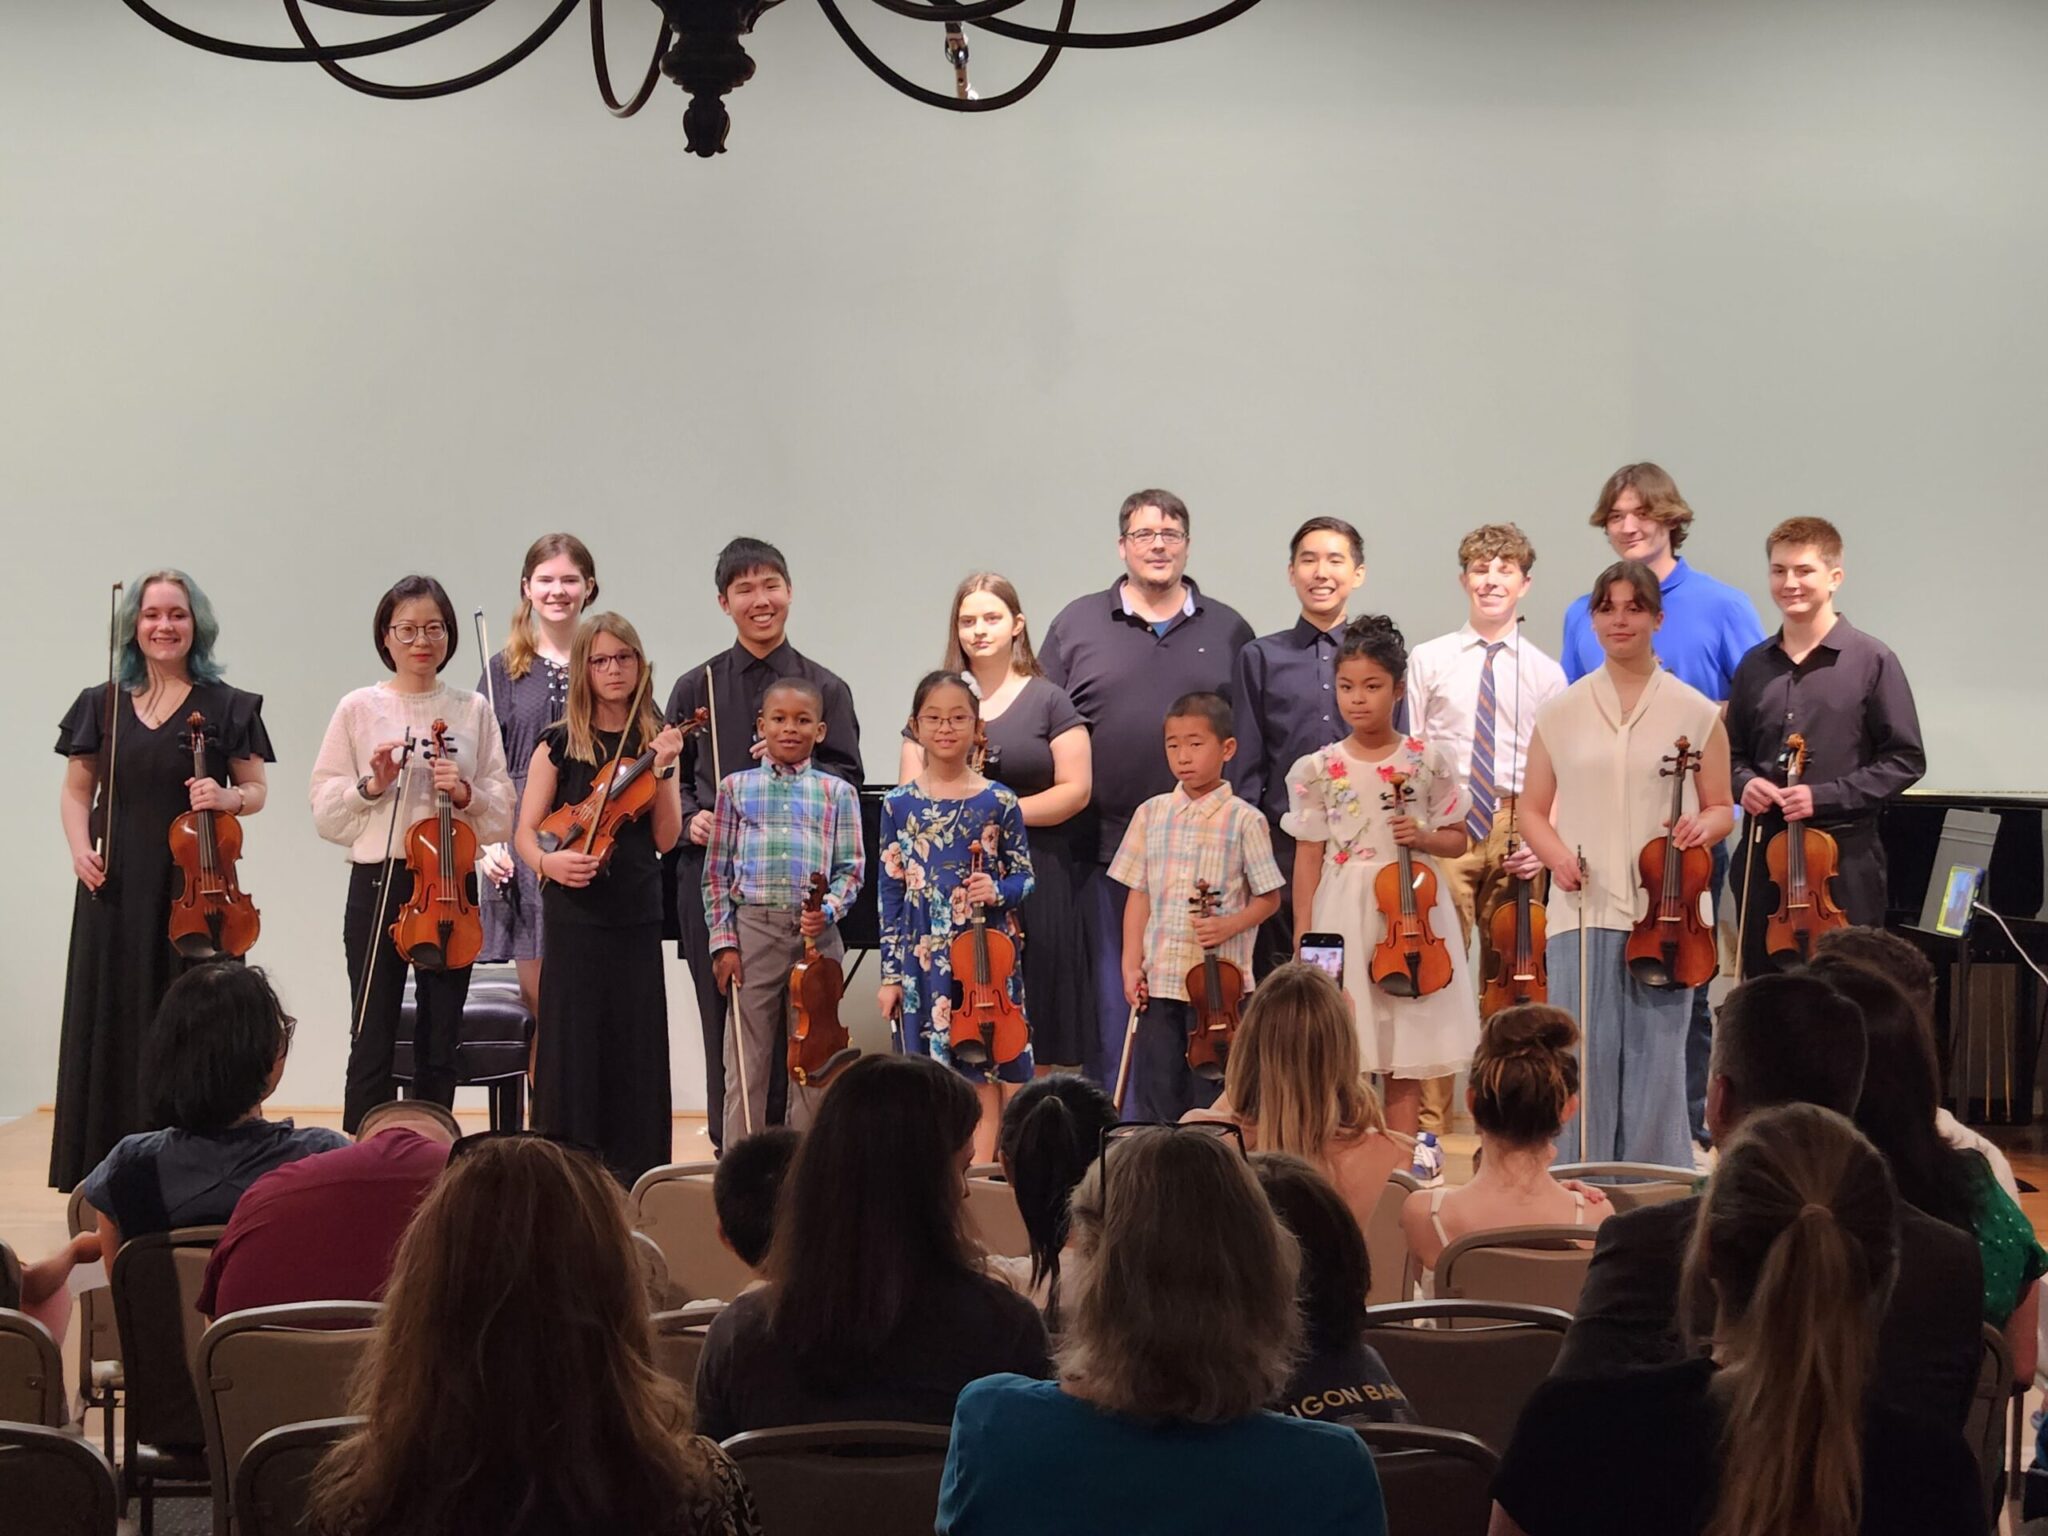 Violin Recitals & Group Violin Lessons in Raleigh NC & Fuquay-Varina